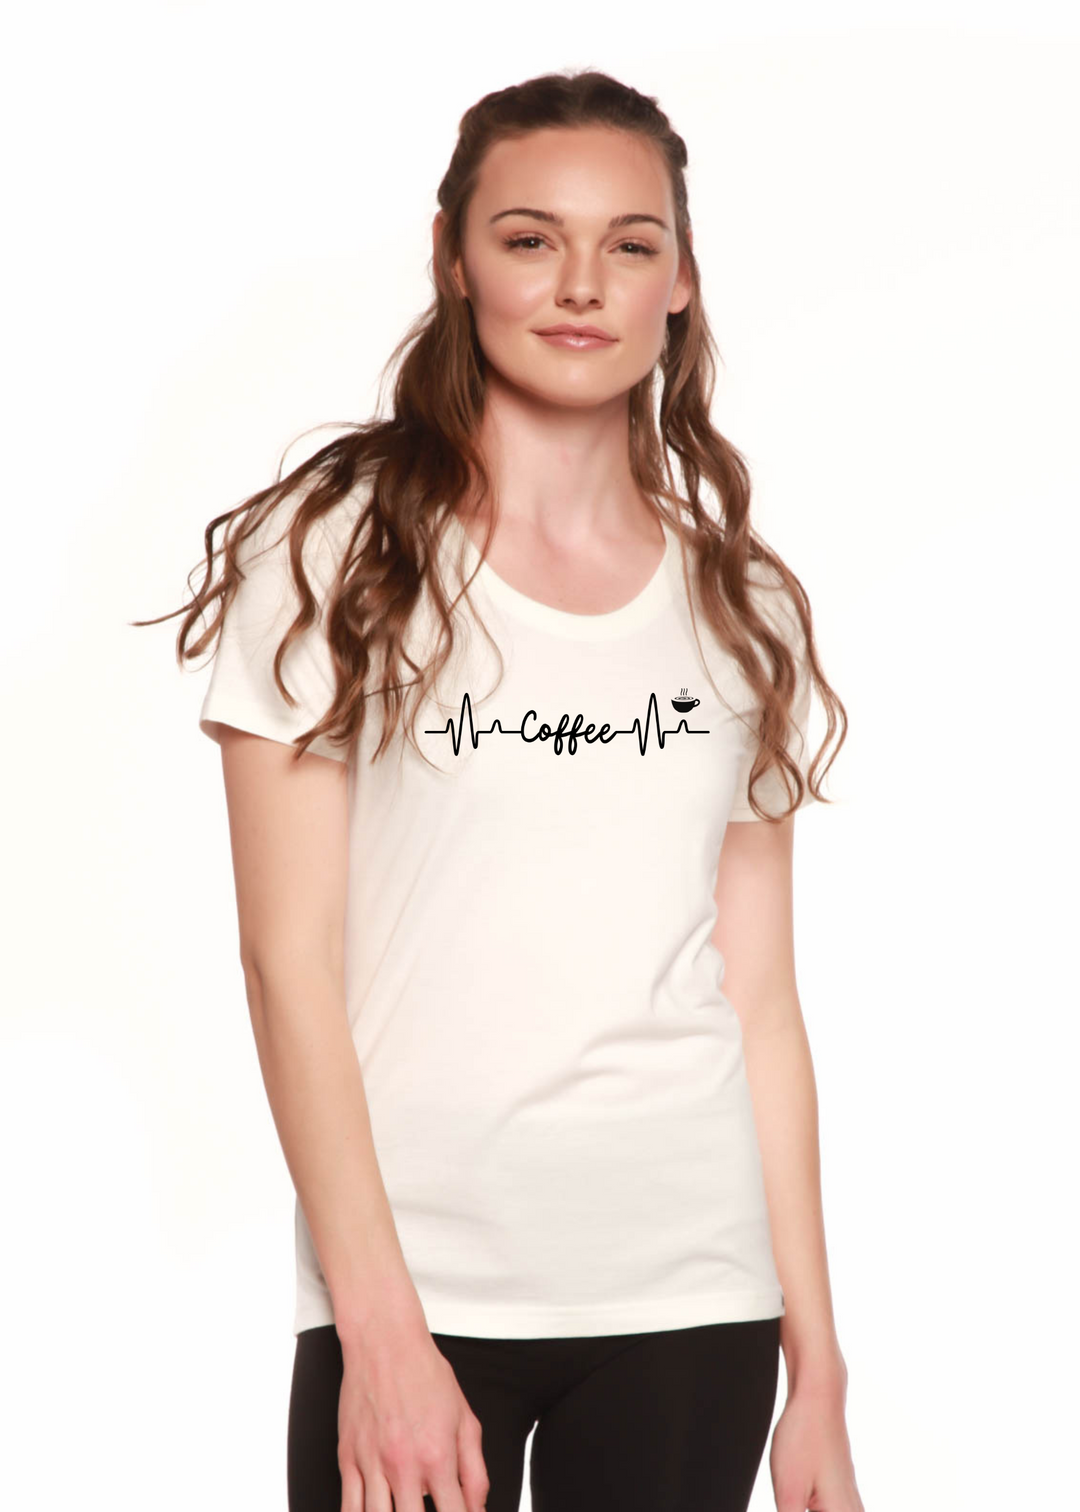 Heartbeat Coffee Printed Women's Bamboo/Cotton Short Sleeve Scoop Neck T-Shirt